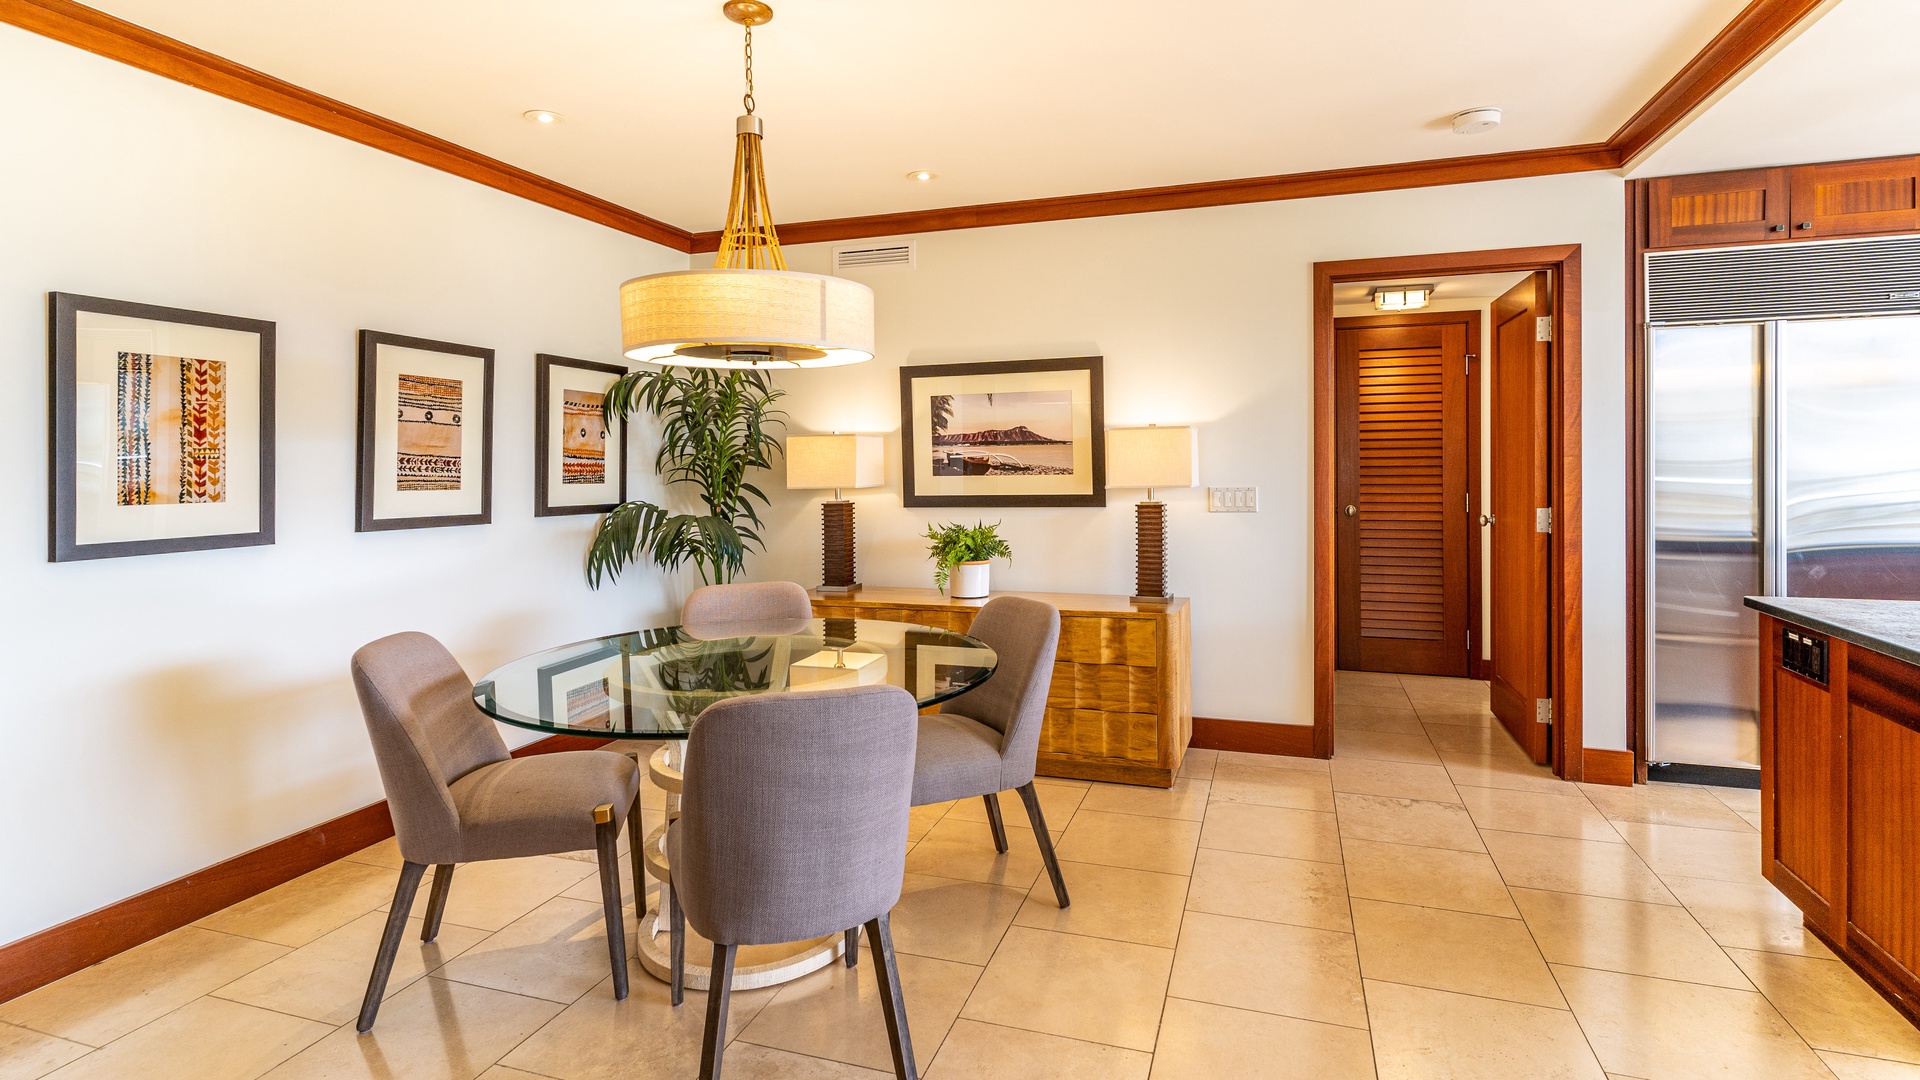 Kapolei Vacation Rentals, Ko Olina Beach Villas B403 - The spacious dining are with boutique lighting and framed art.